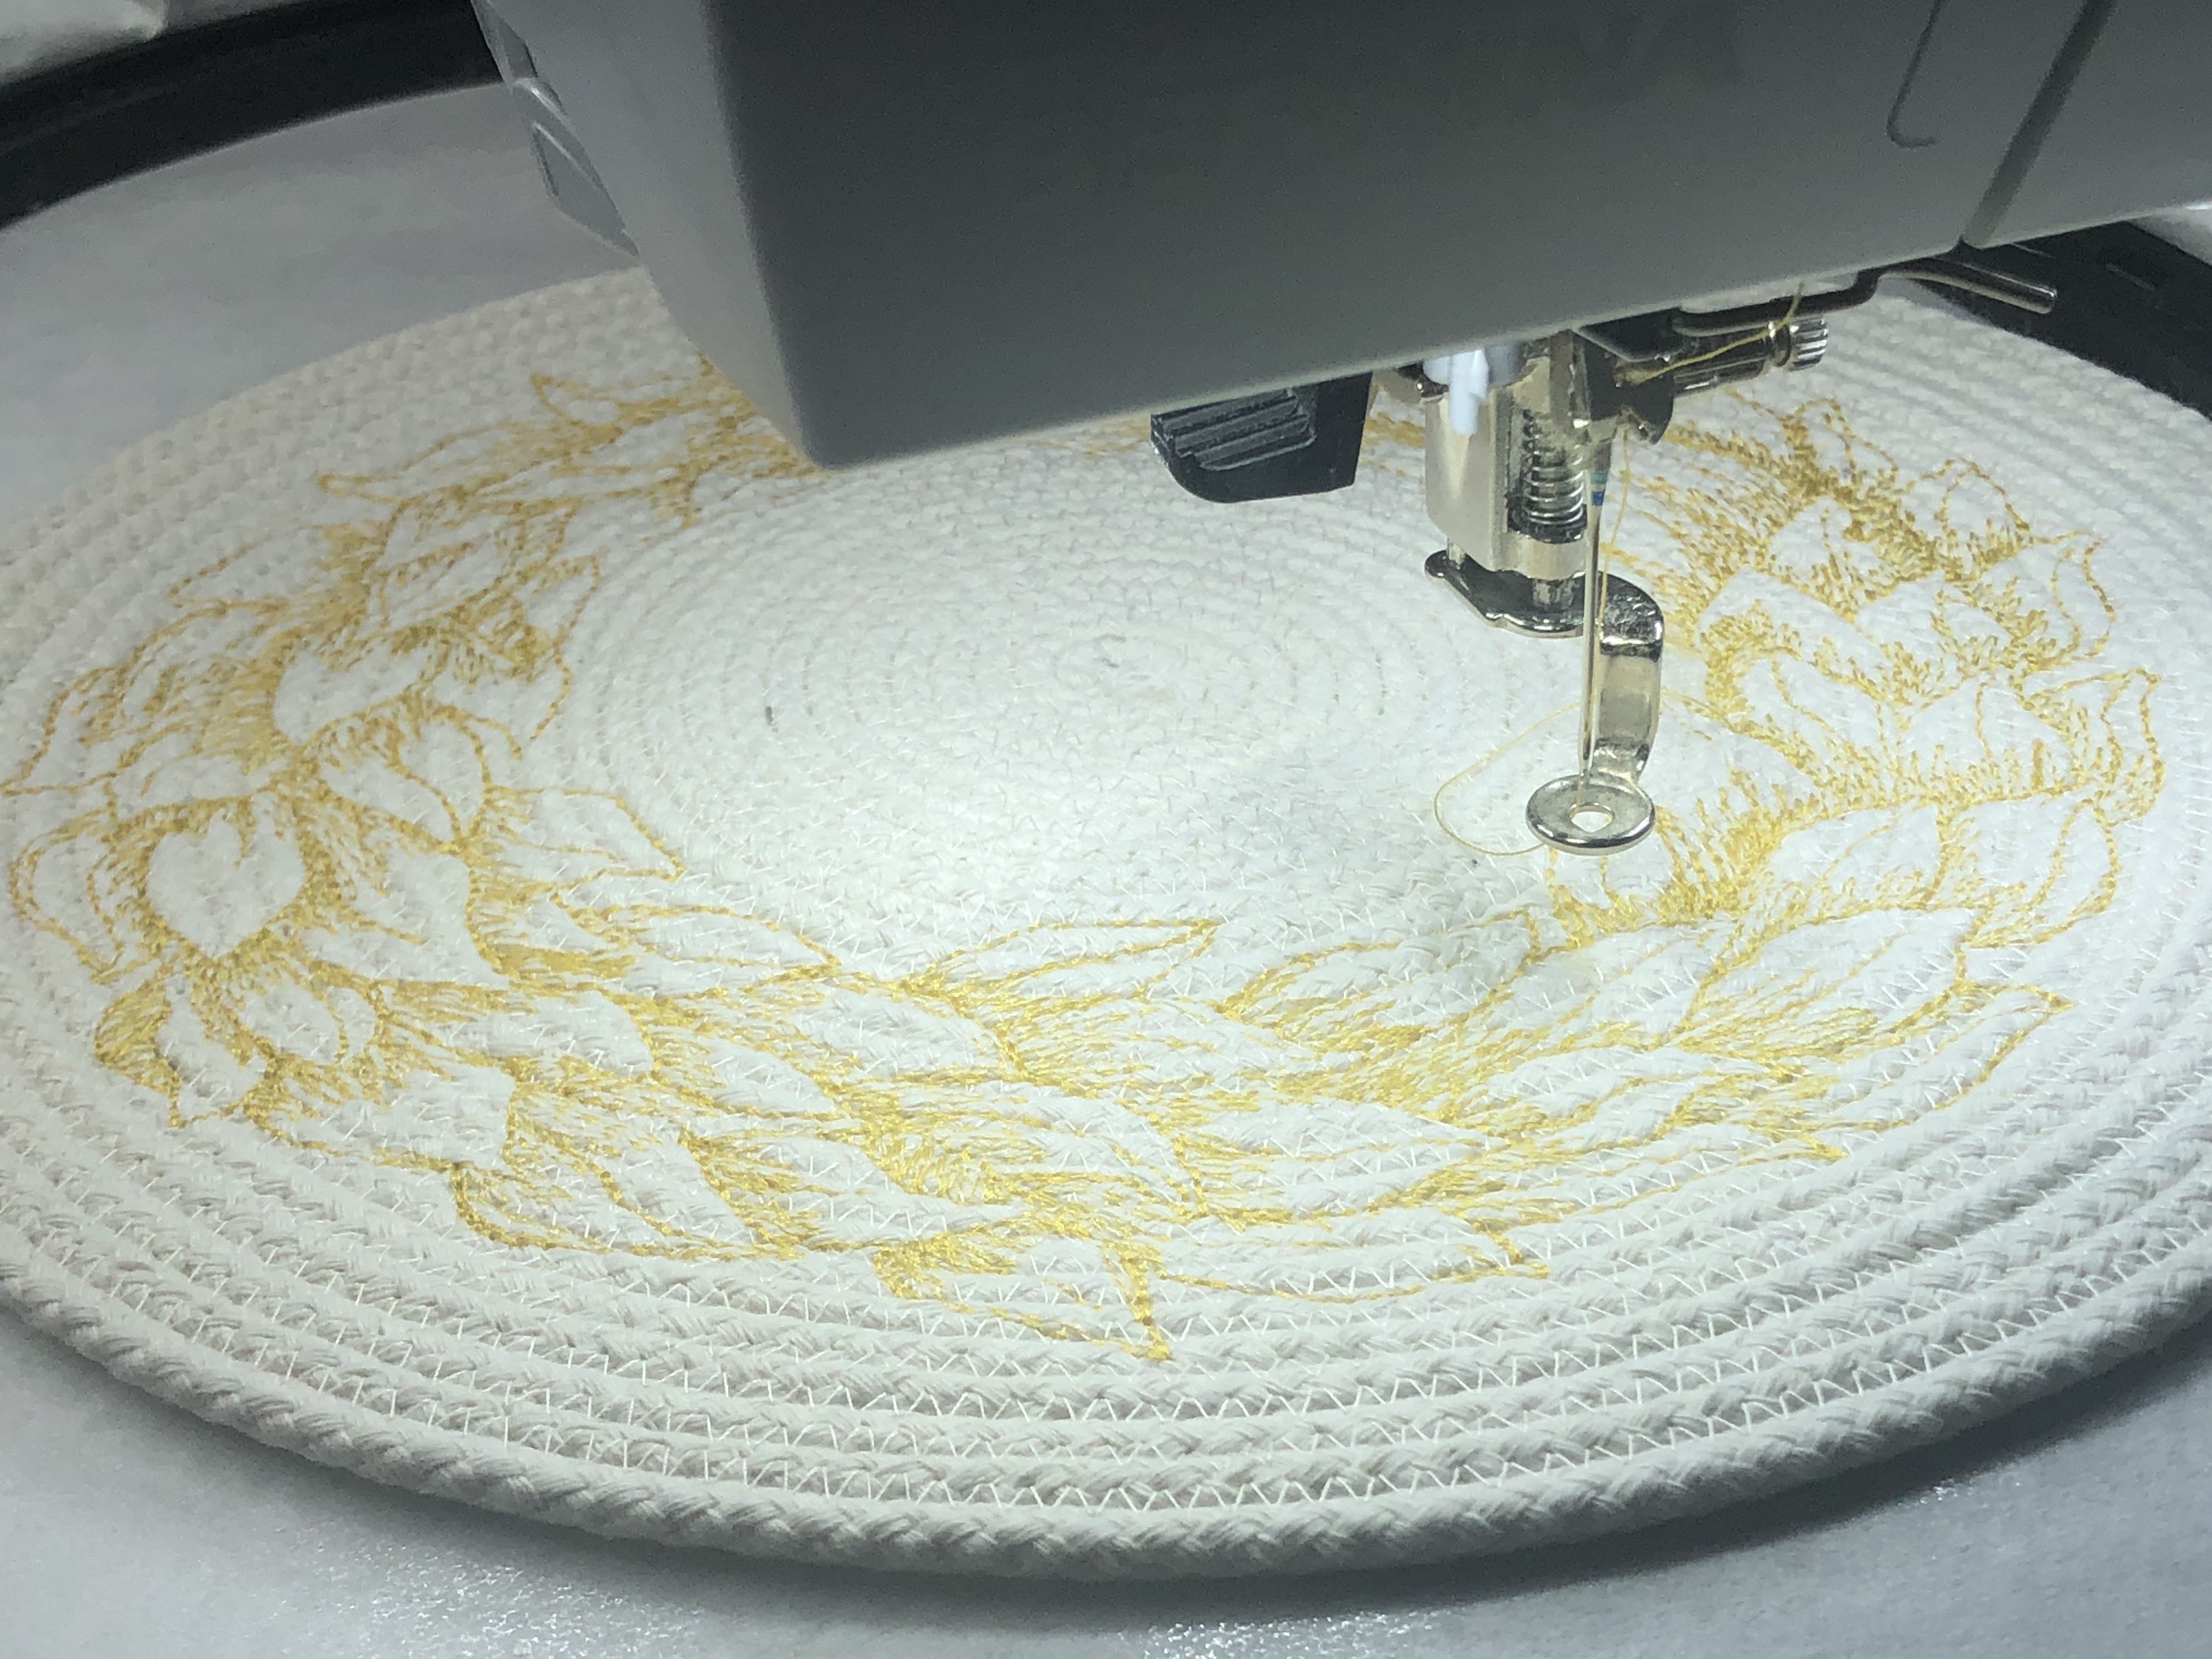 Machine Embroider a Rope Bowl - WeAllSew